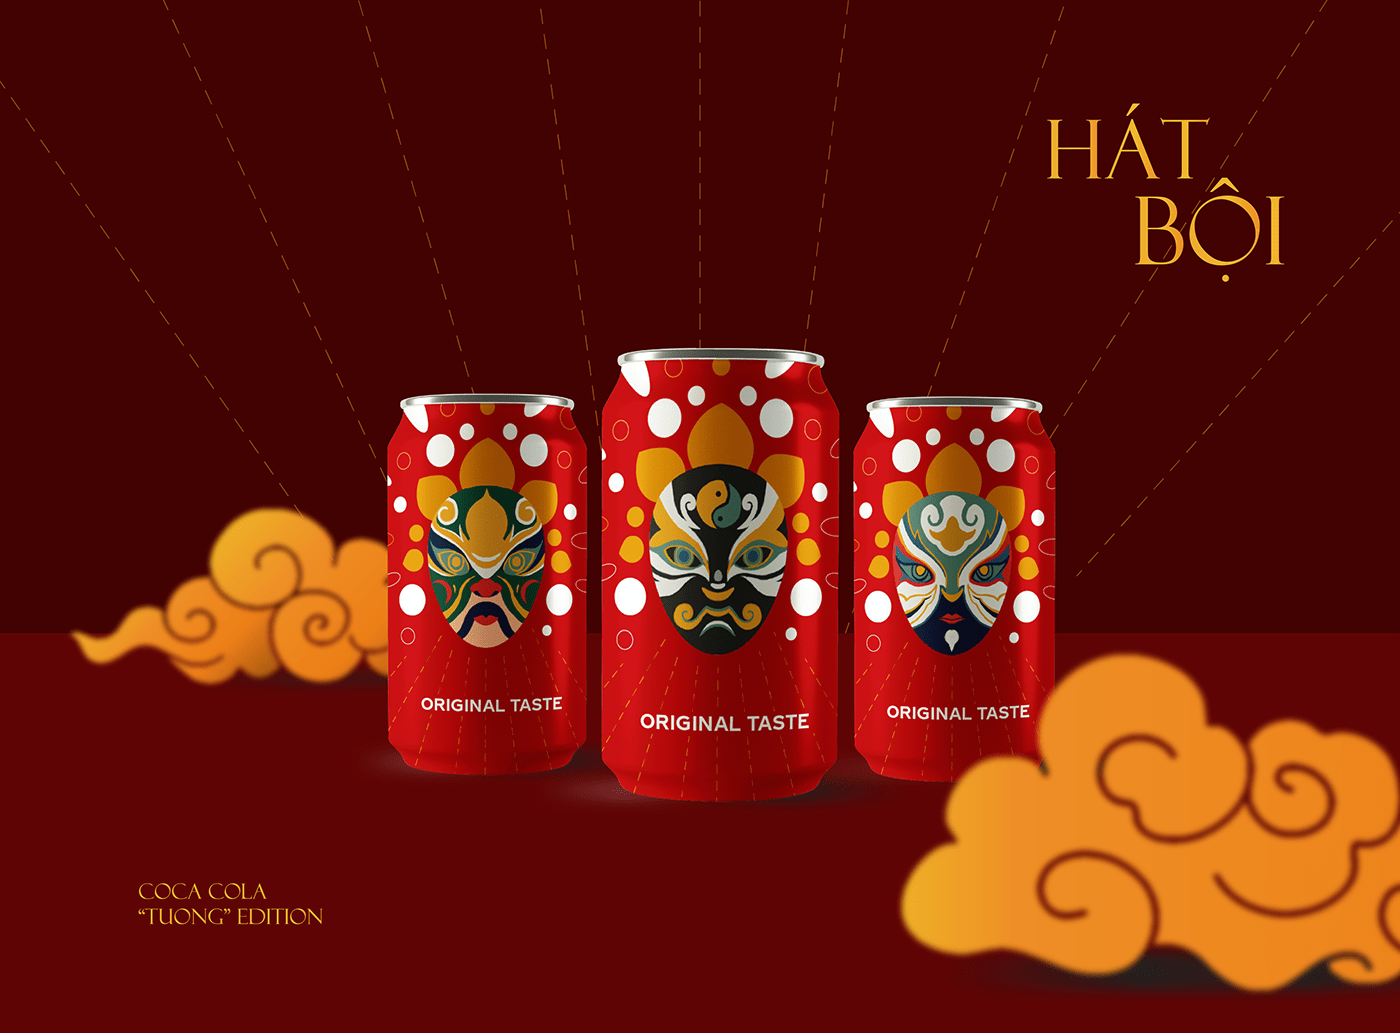 coke culture drinks label design package design  product packaging TRADITIONAL ART traditions vietnam